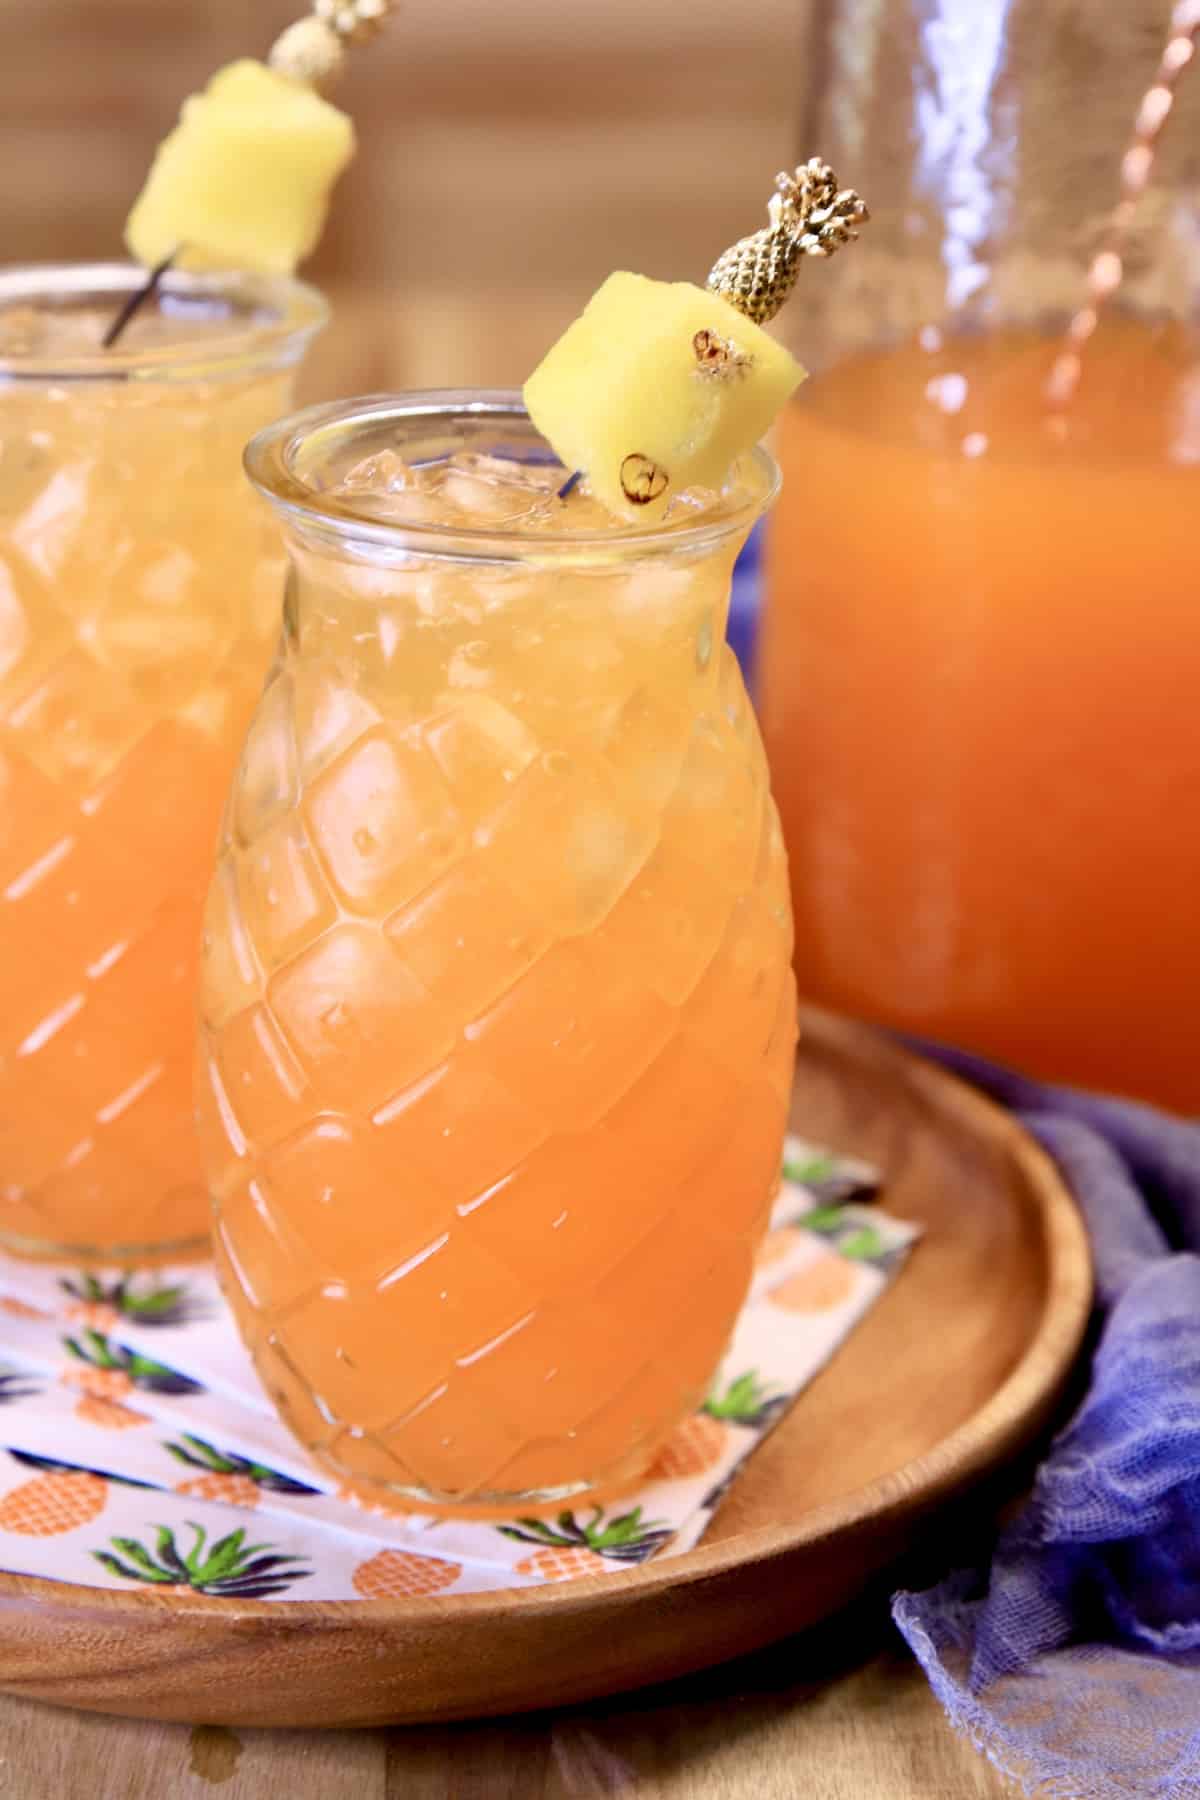 Orange punch in pineapple glasses, pitcher of punch.